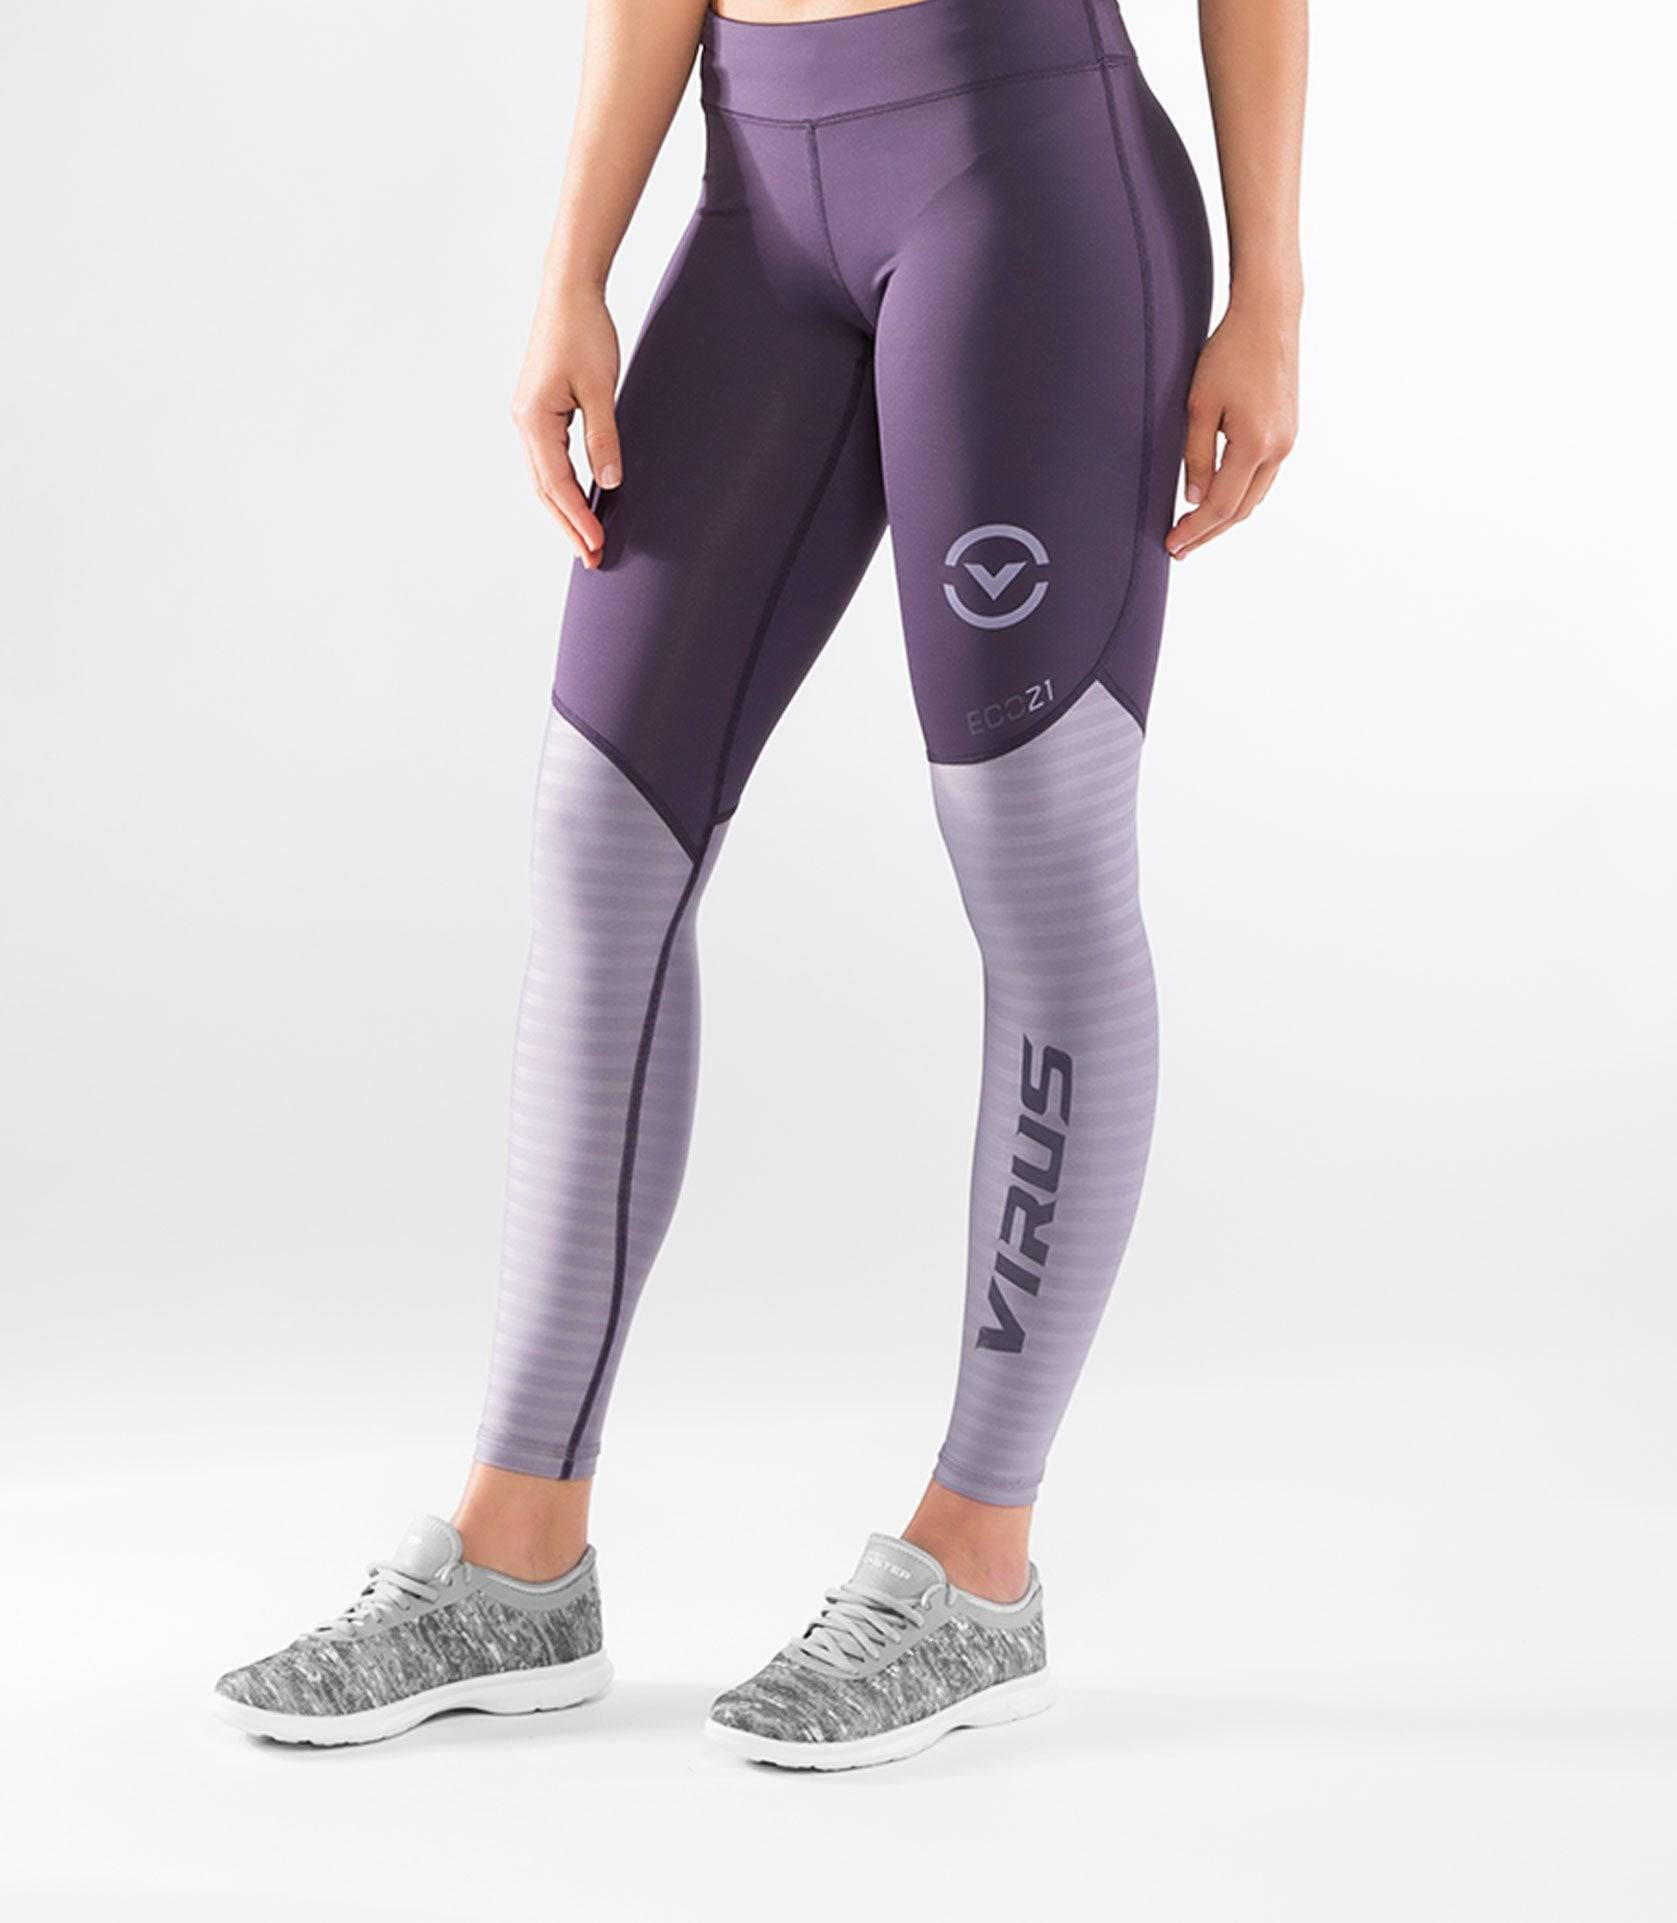 Buy Virus Women's Stay Cool Eco21.5 Compression Pants - Night  Shade/Lavender (Night Shade/Lavender, X-Smal) at